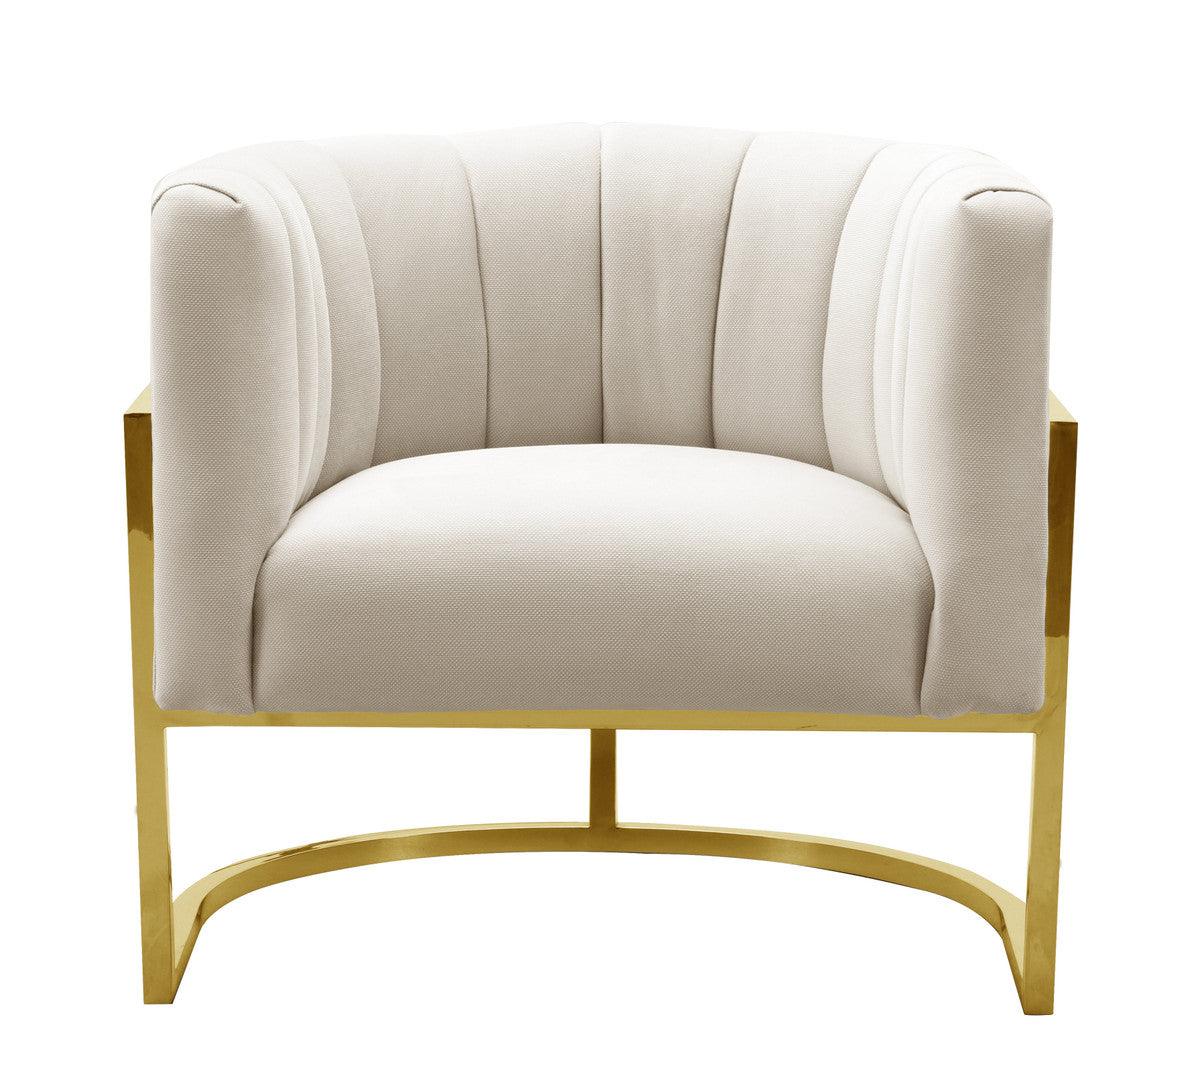 Magna Spotted Cream Chair with Gold Base - Euro Living Furniture